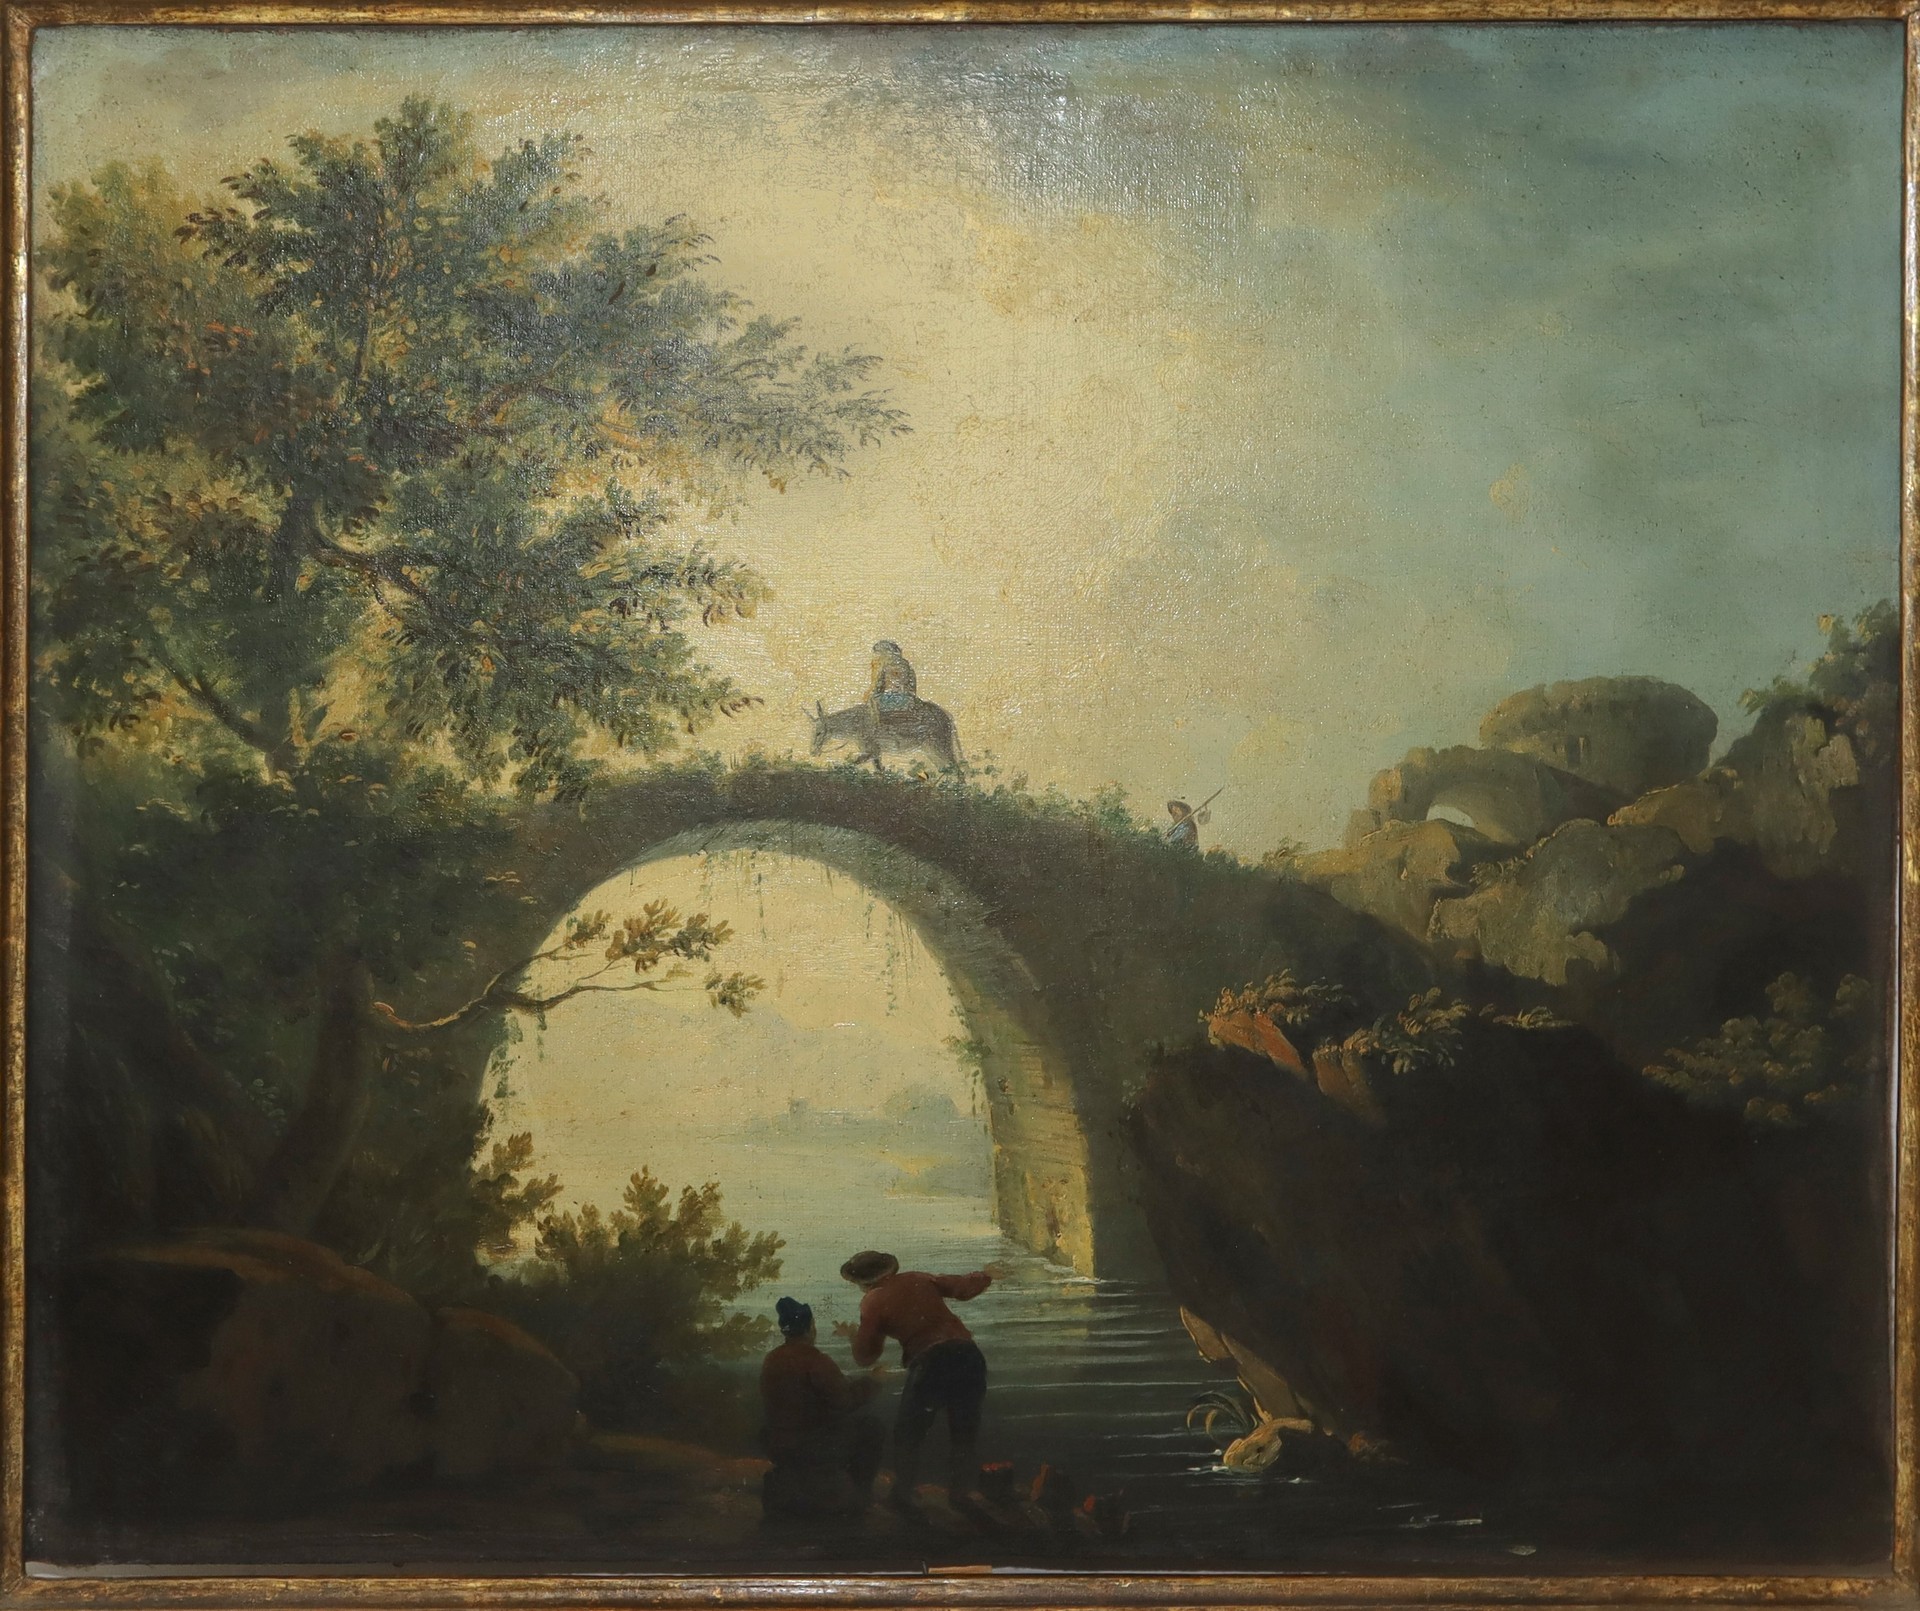 River landscape with character bridge and towers, Italian painter of the eighteenth century. - Image 2 of 4